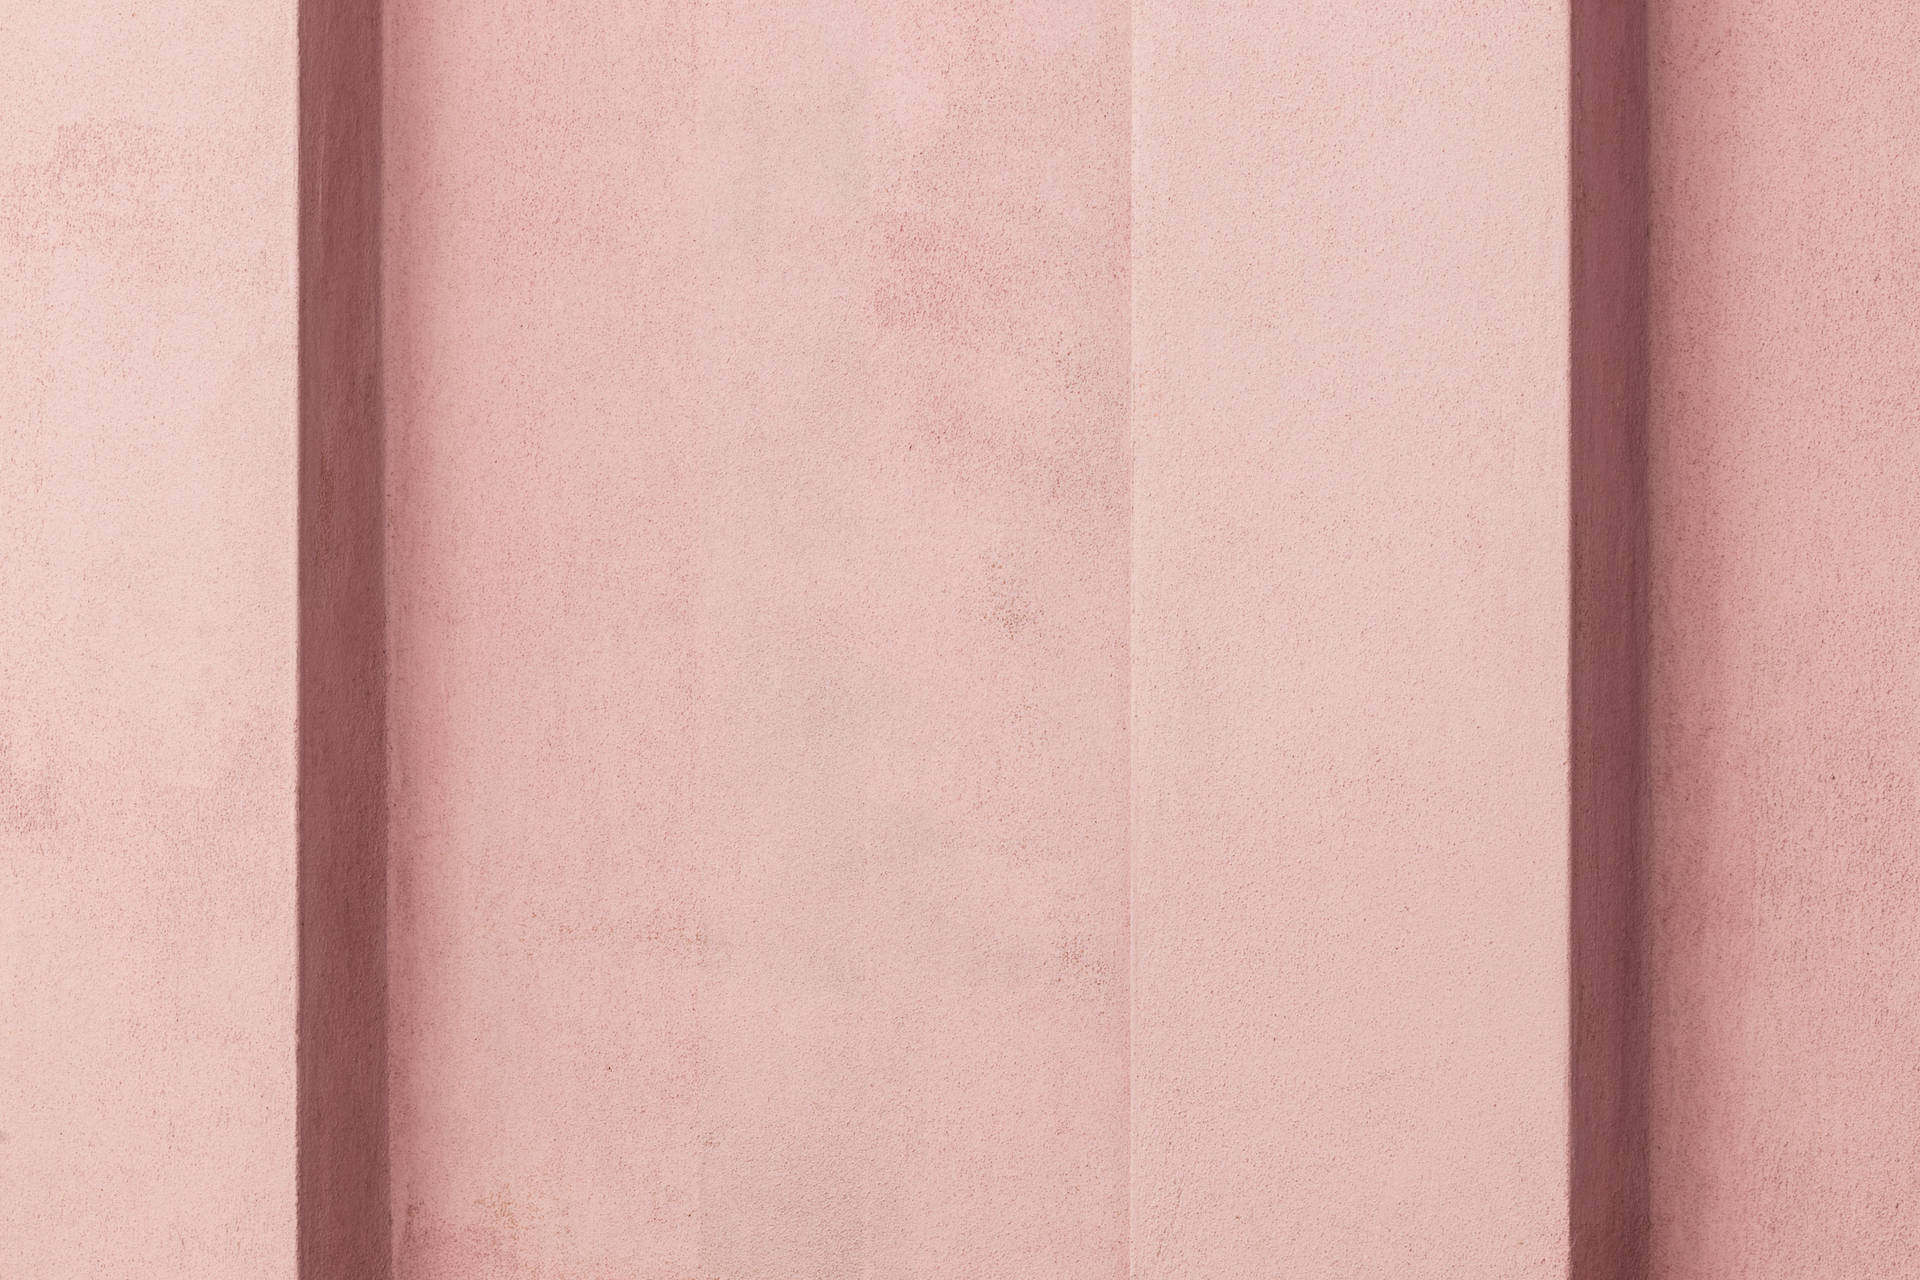 Wall Painted In Kawaii Pink Paint